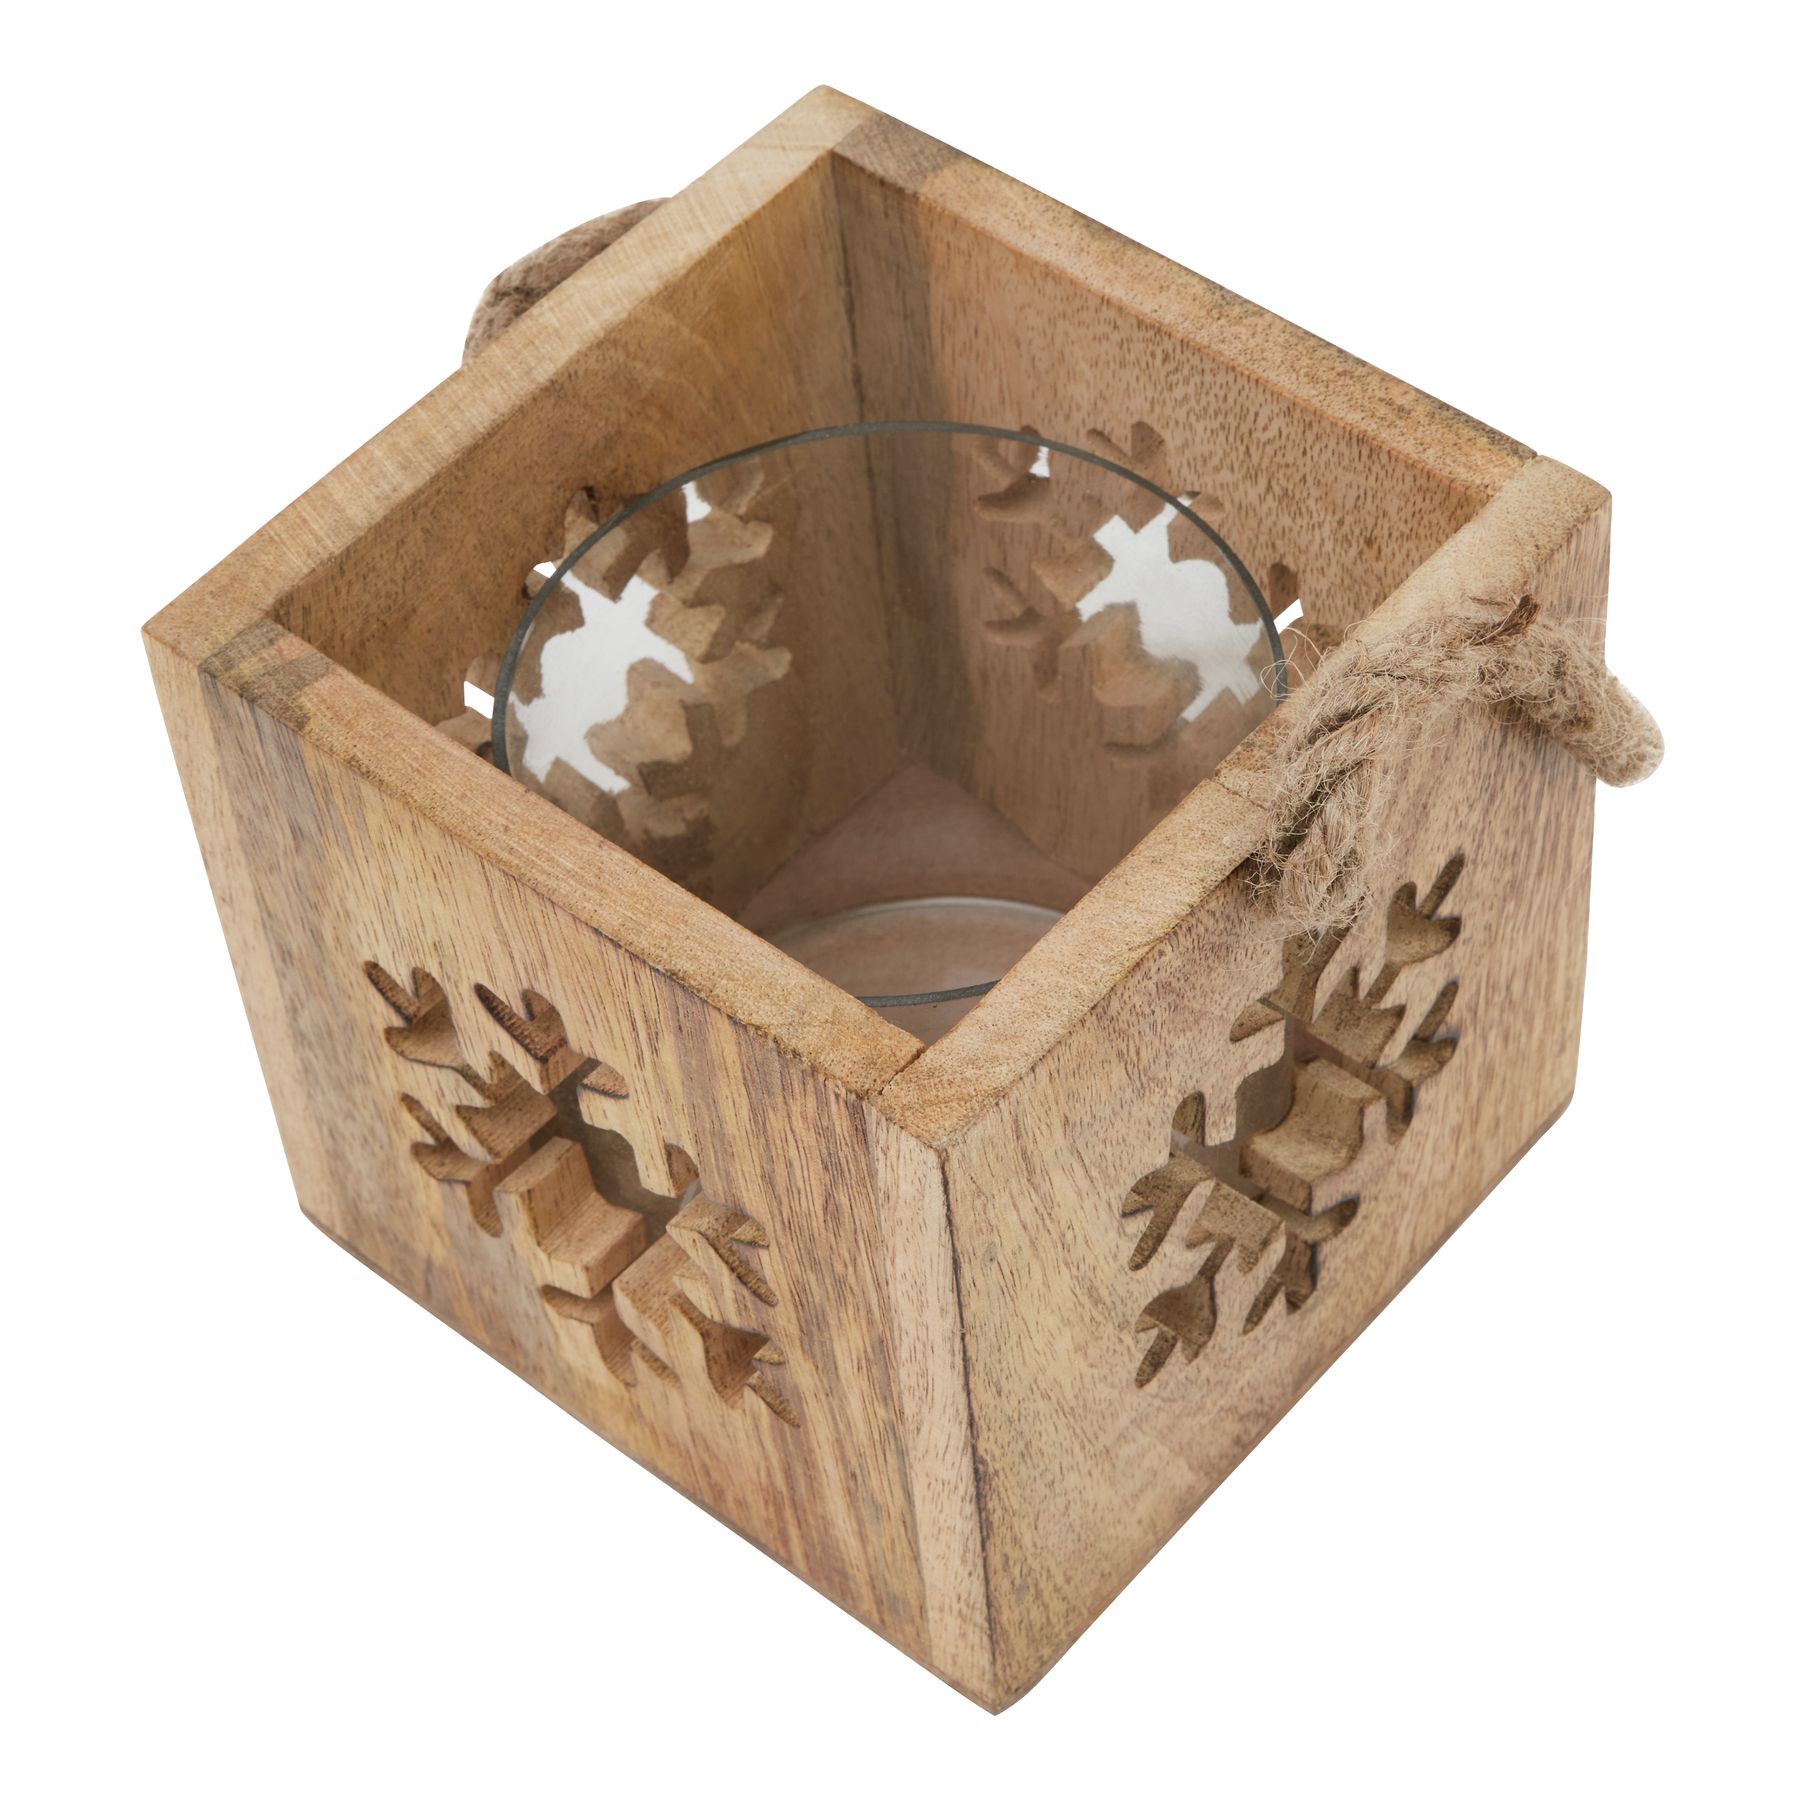 Natural Wooden Snowflake Tealight Candle Holder - Image 2